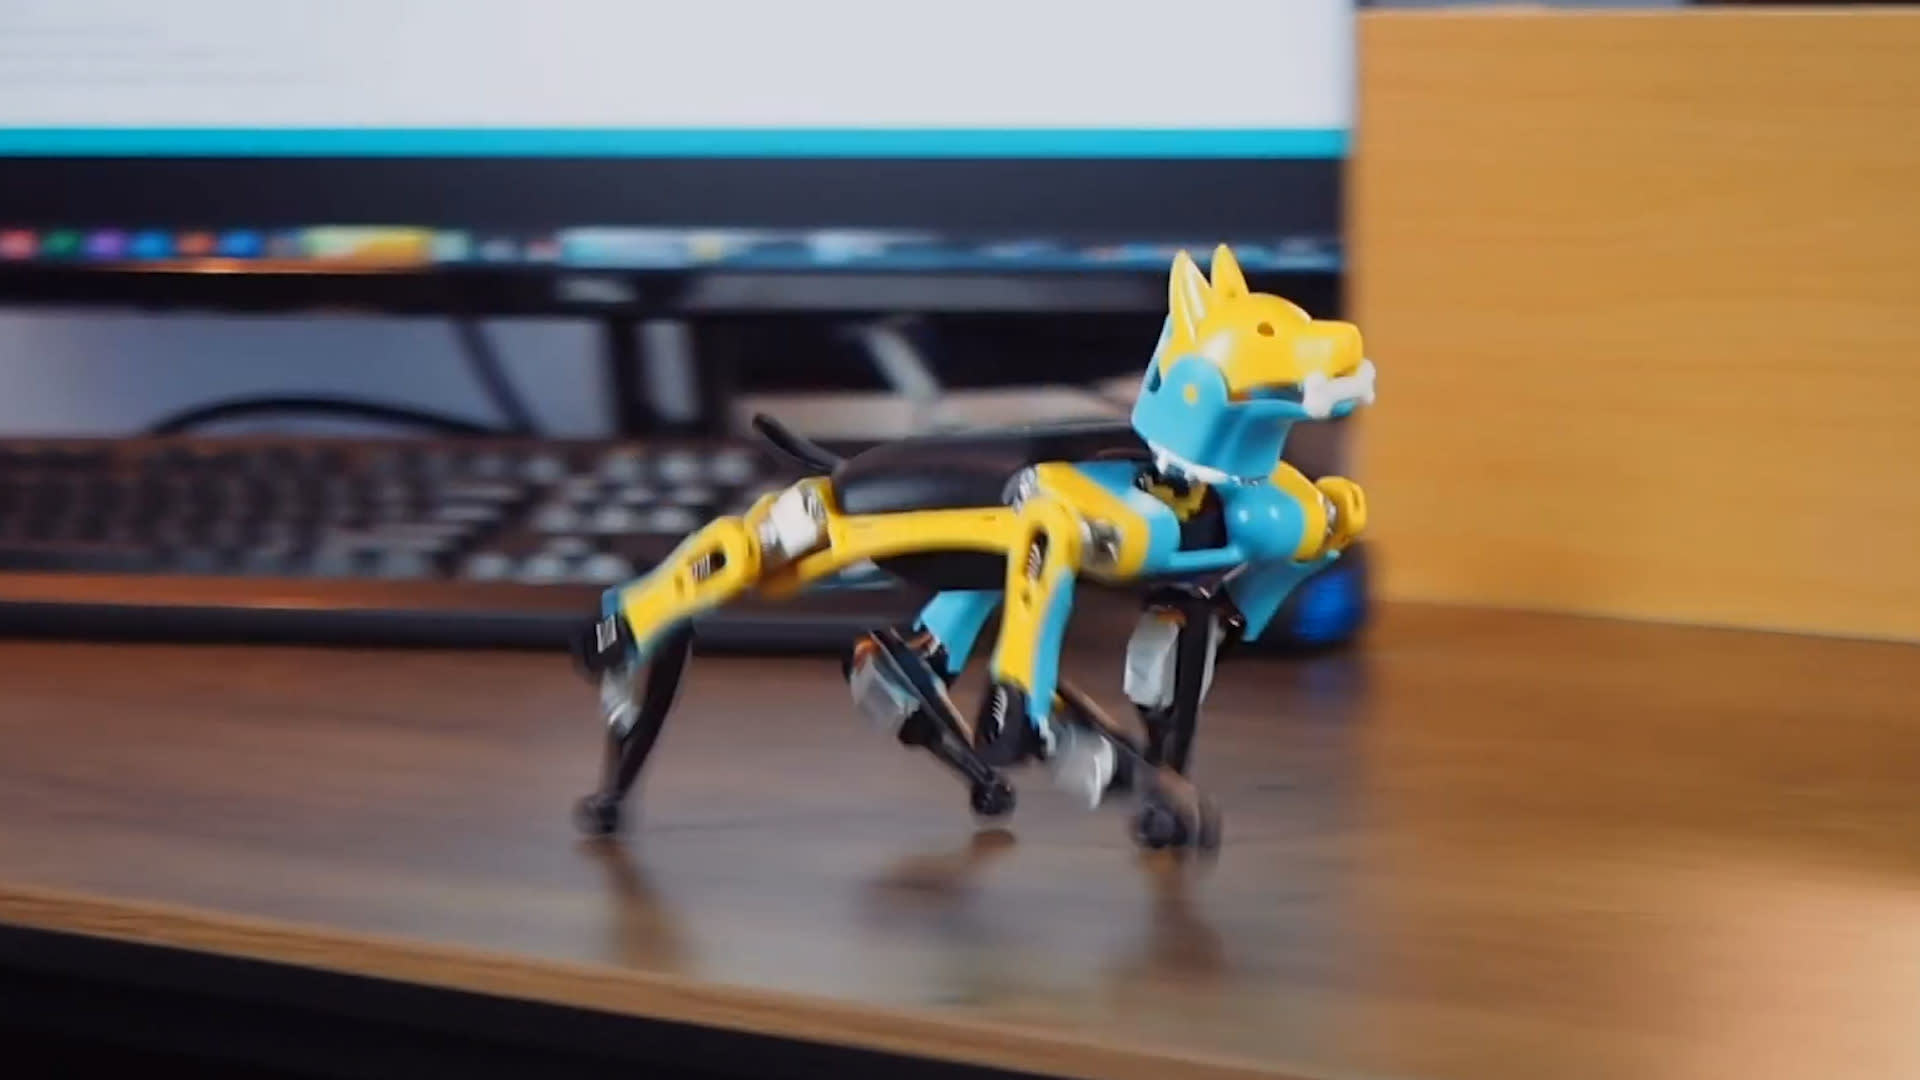 Tiny robot pet can be programmed to do tricks just like a real animal